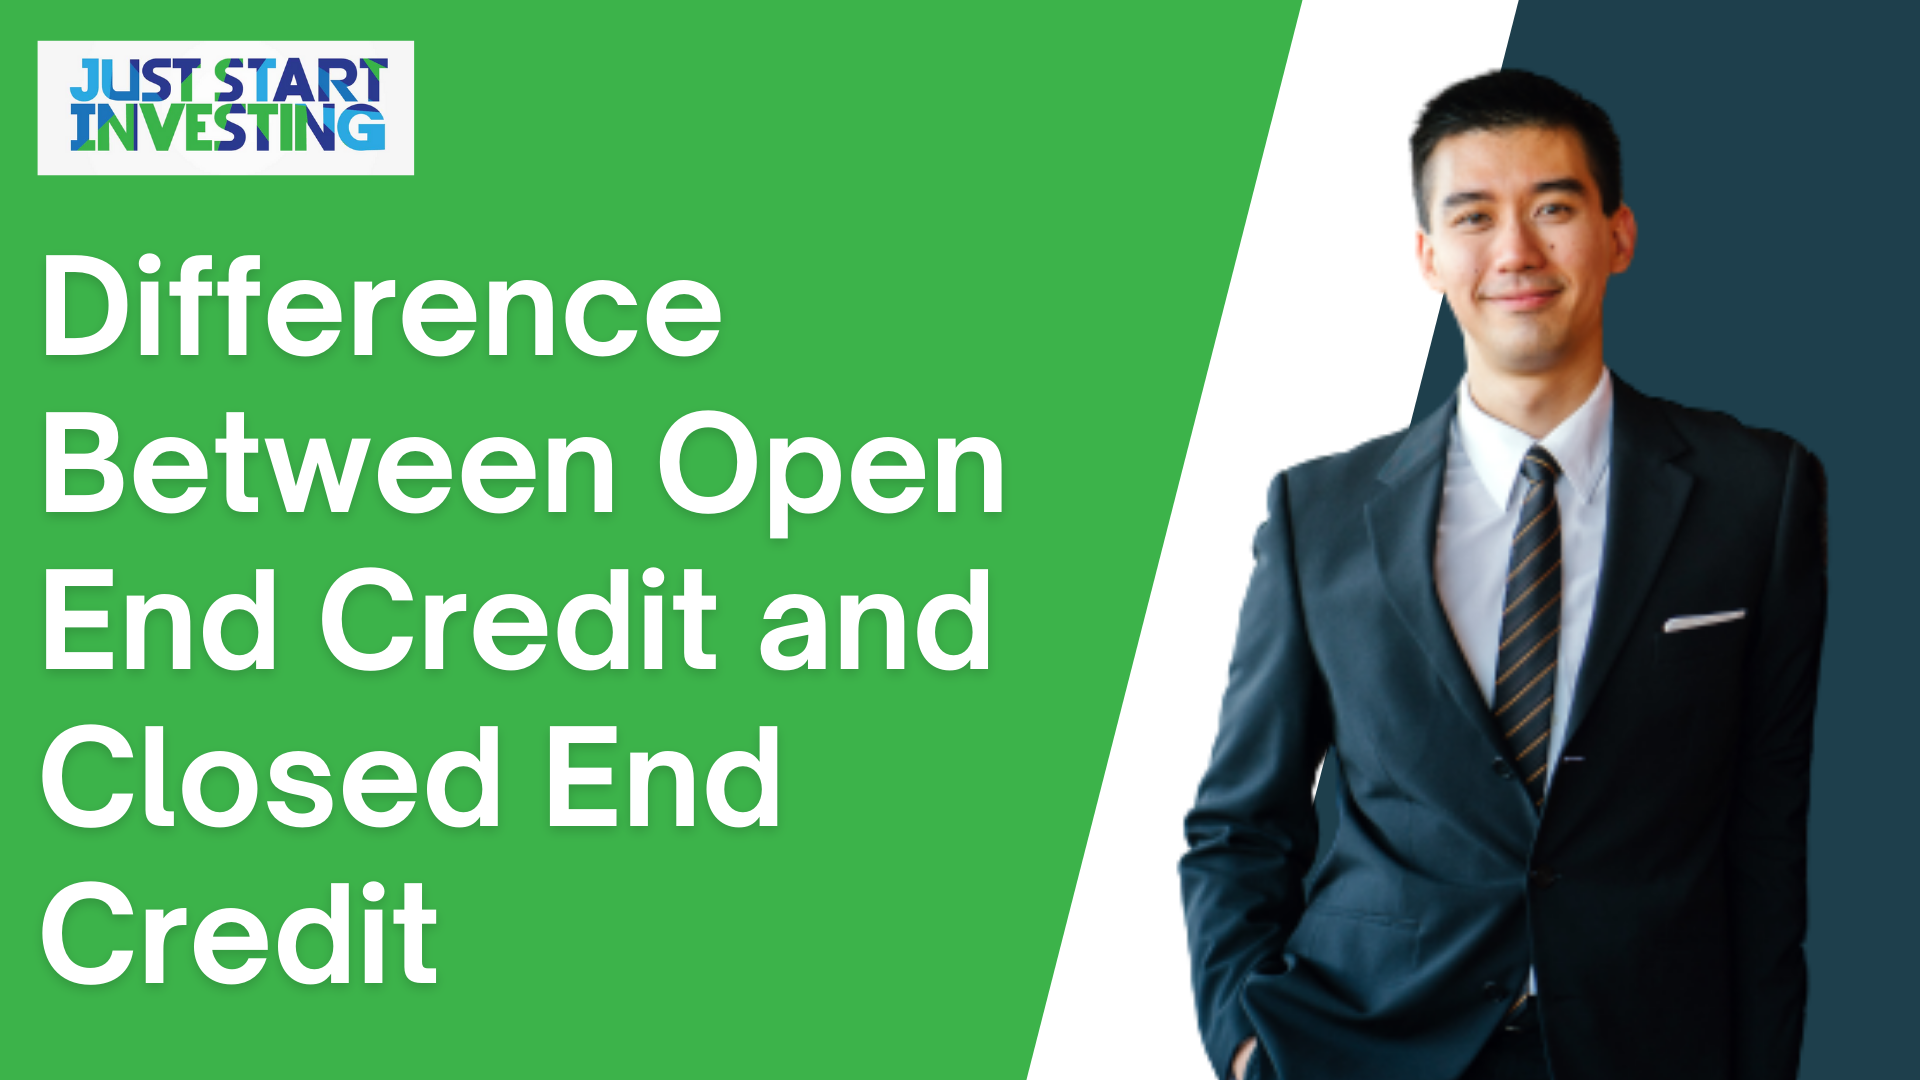 Difference Between Open End Credit and Closed End Credit